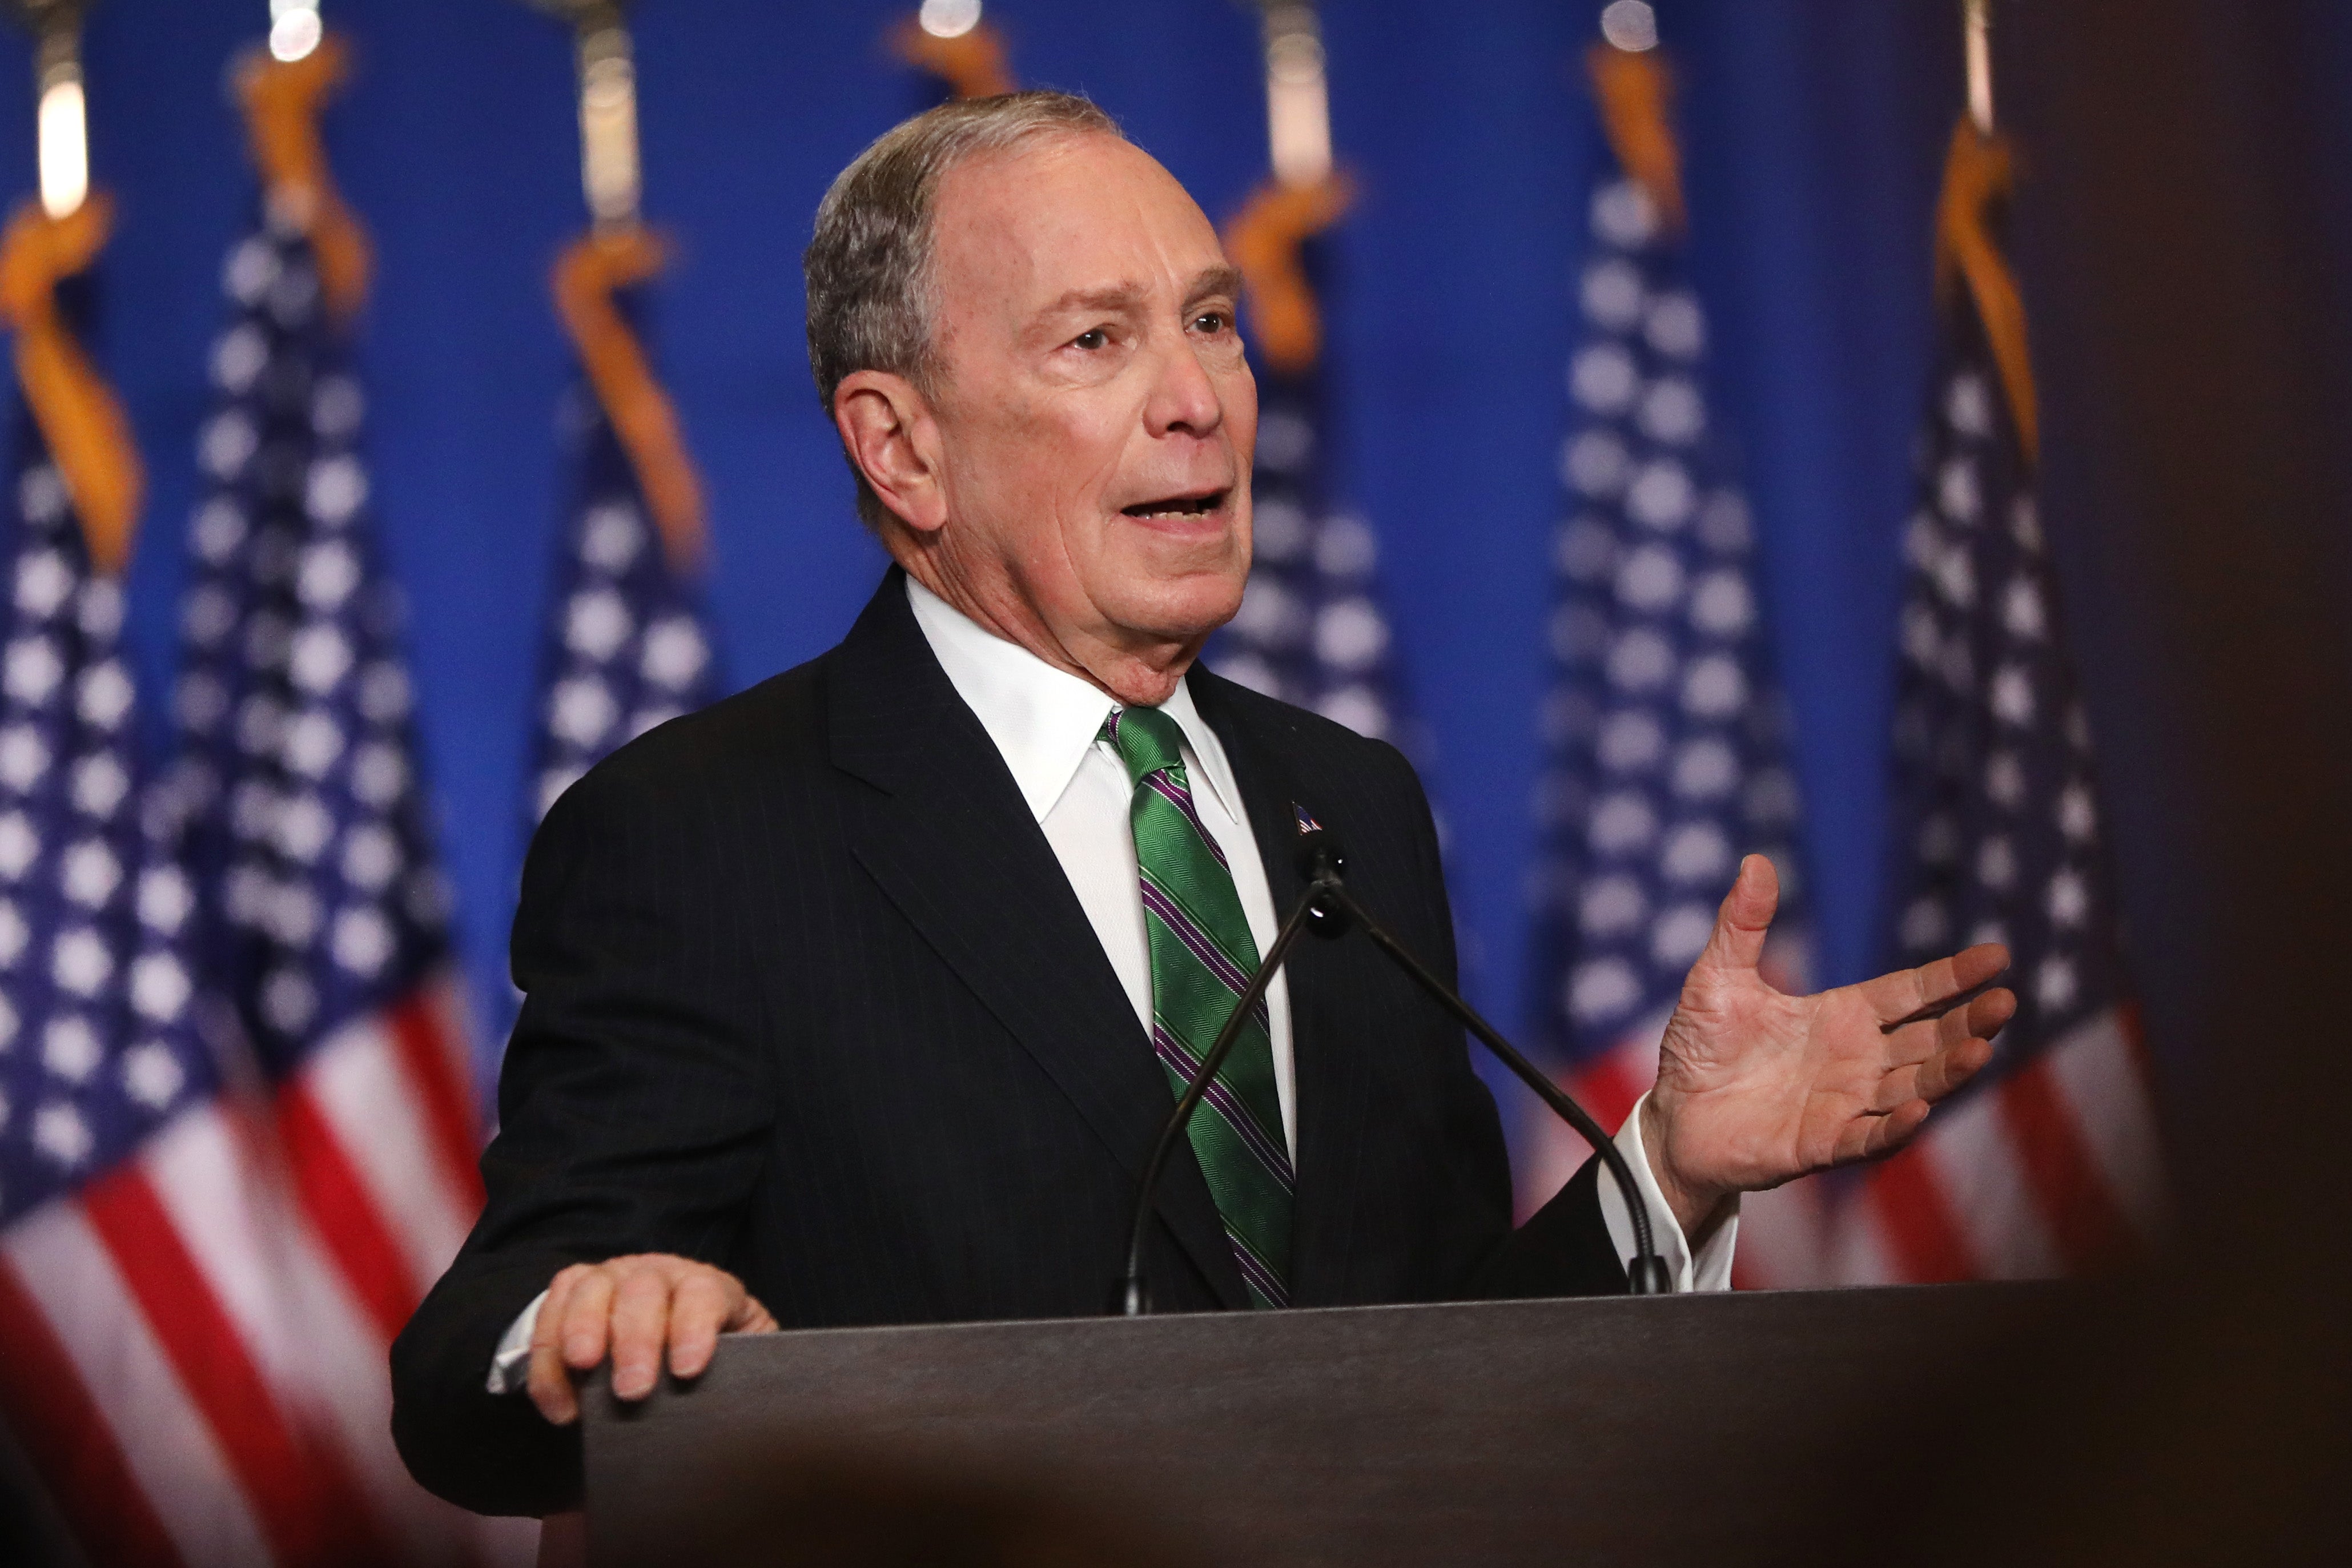 Former New York mayor Michael Bloomberg donated the most of all- $1.4billion- including $1billion of his own money into his failed presidential bid. Pictured in March 2020 after announcing the end of his campaign.